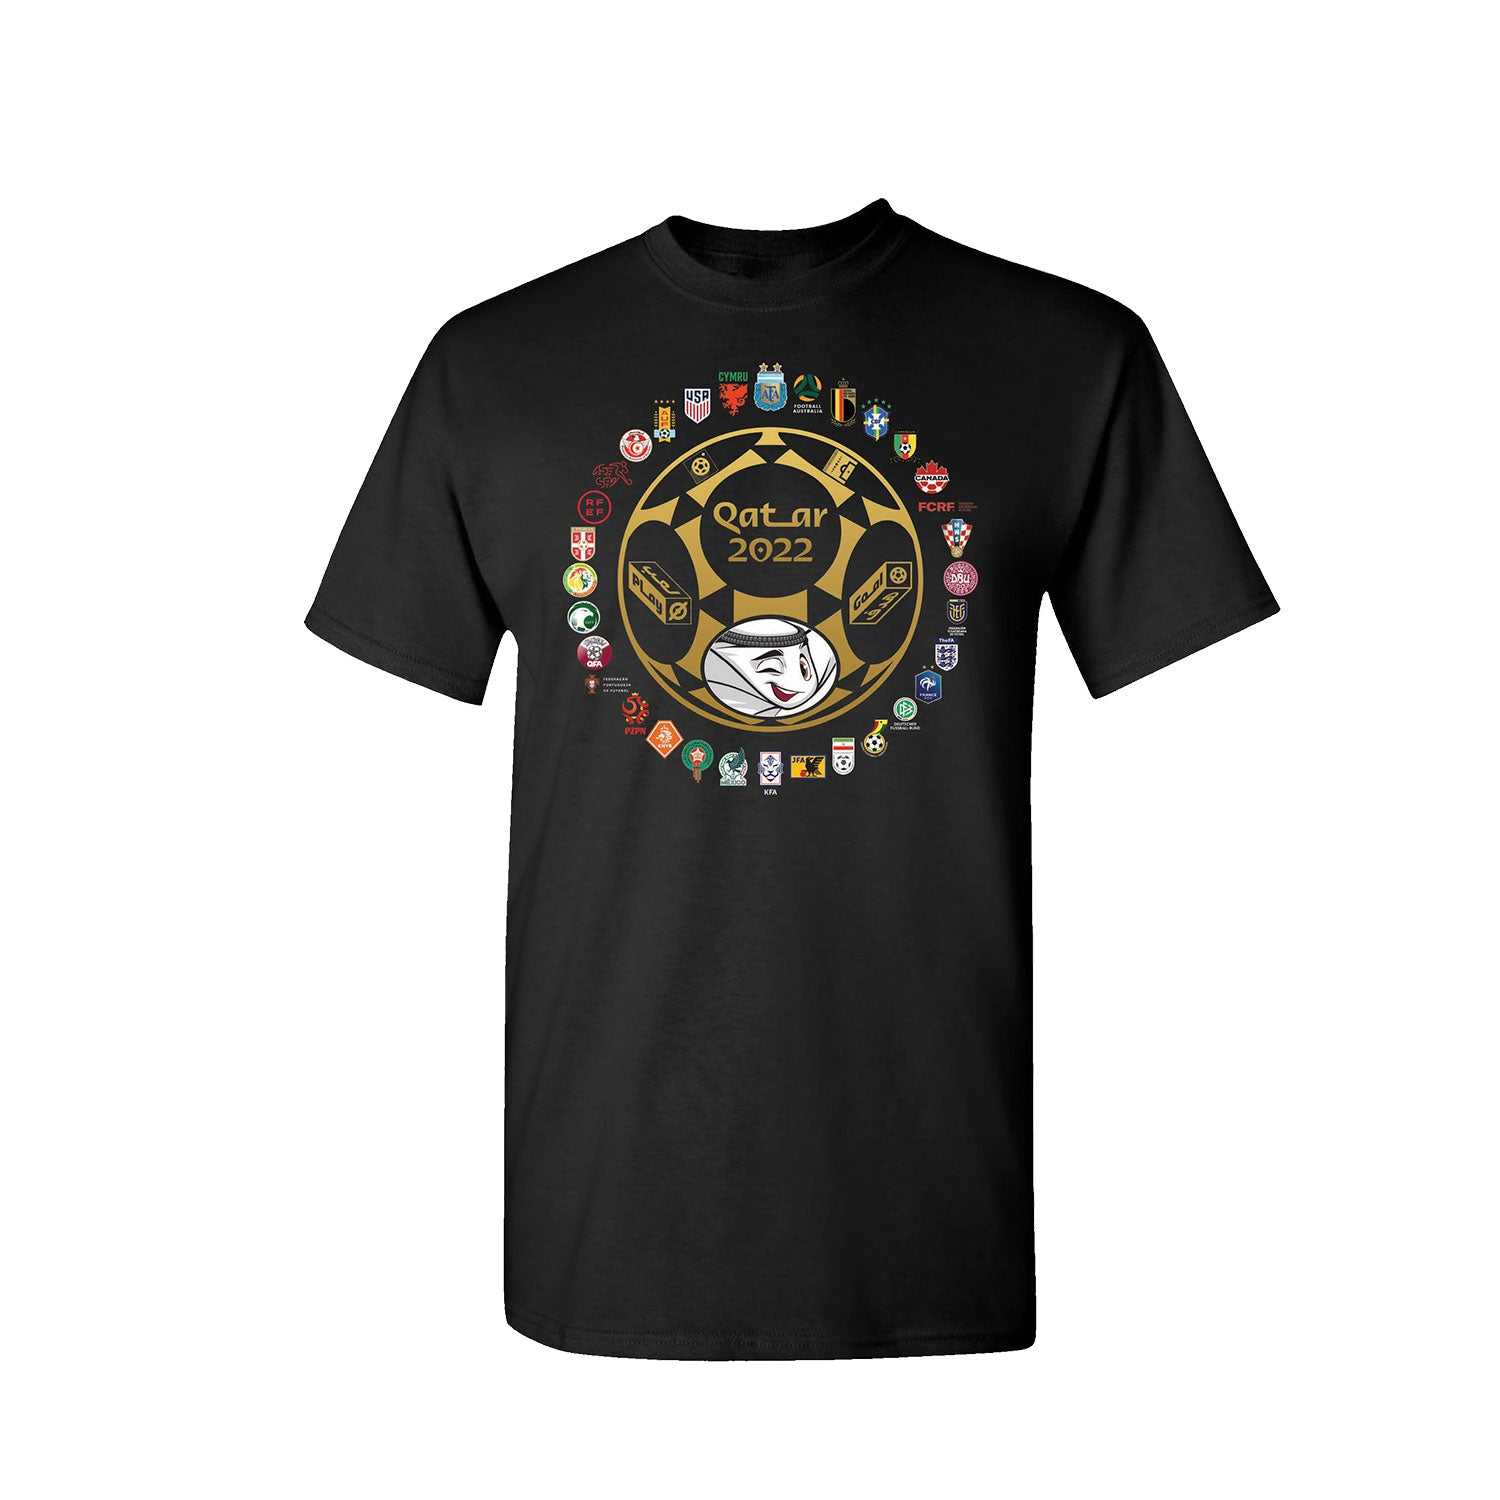 World Cup 2022 32 Federations Tee Black - Women's